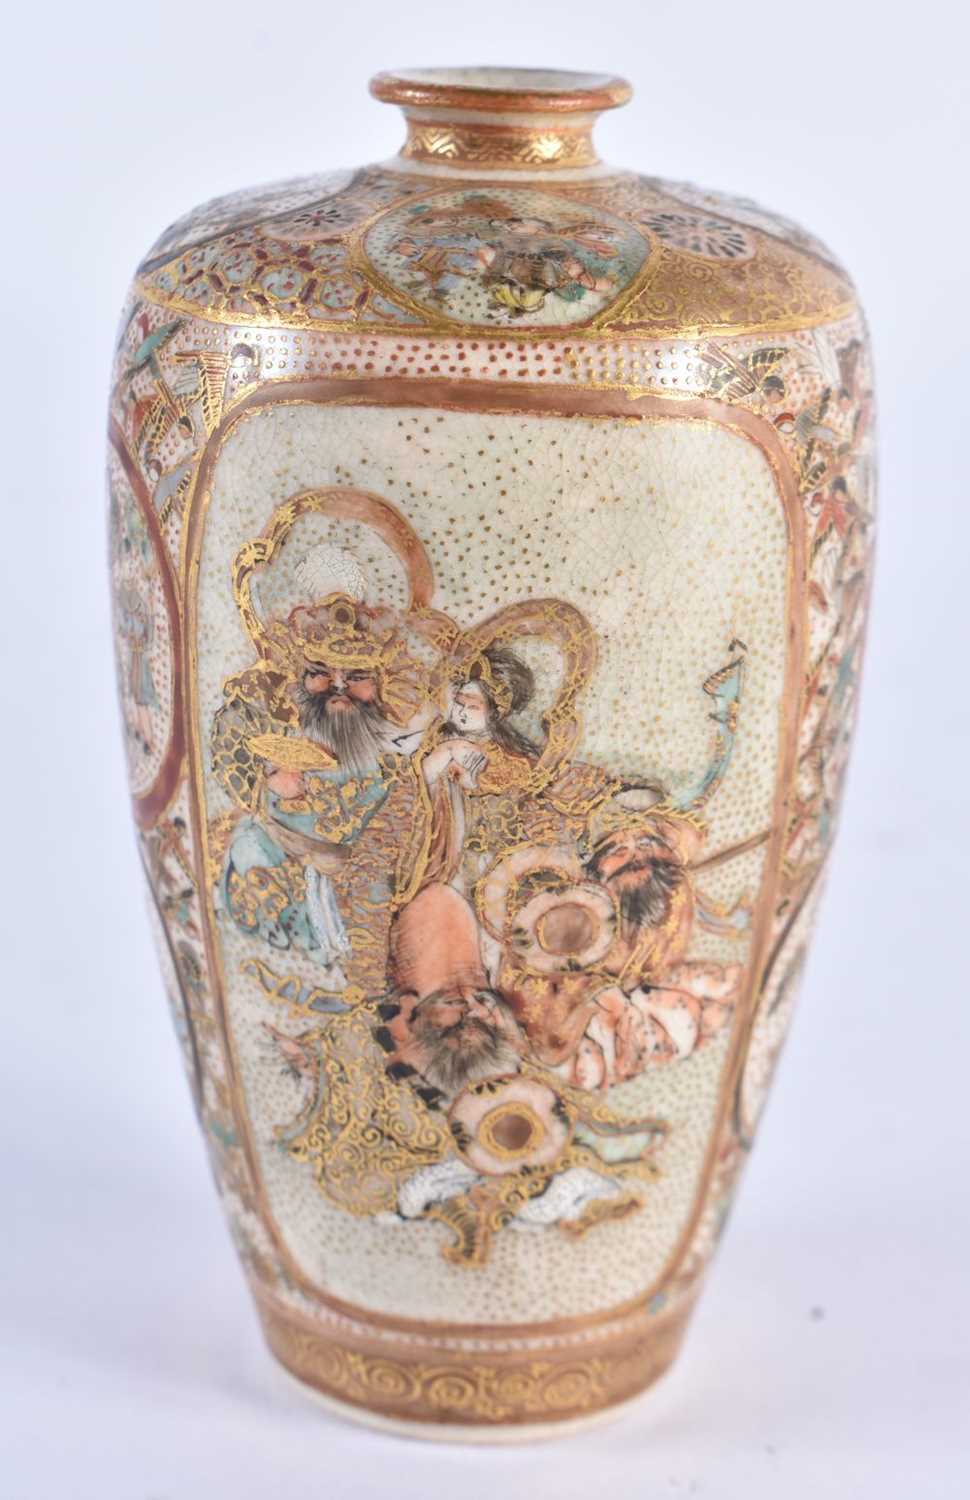 A SMALL 19TH CENTURY JAPANESE MEIJI PERIOD SATSUMA POTTERY VASE painted with figures and birds